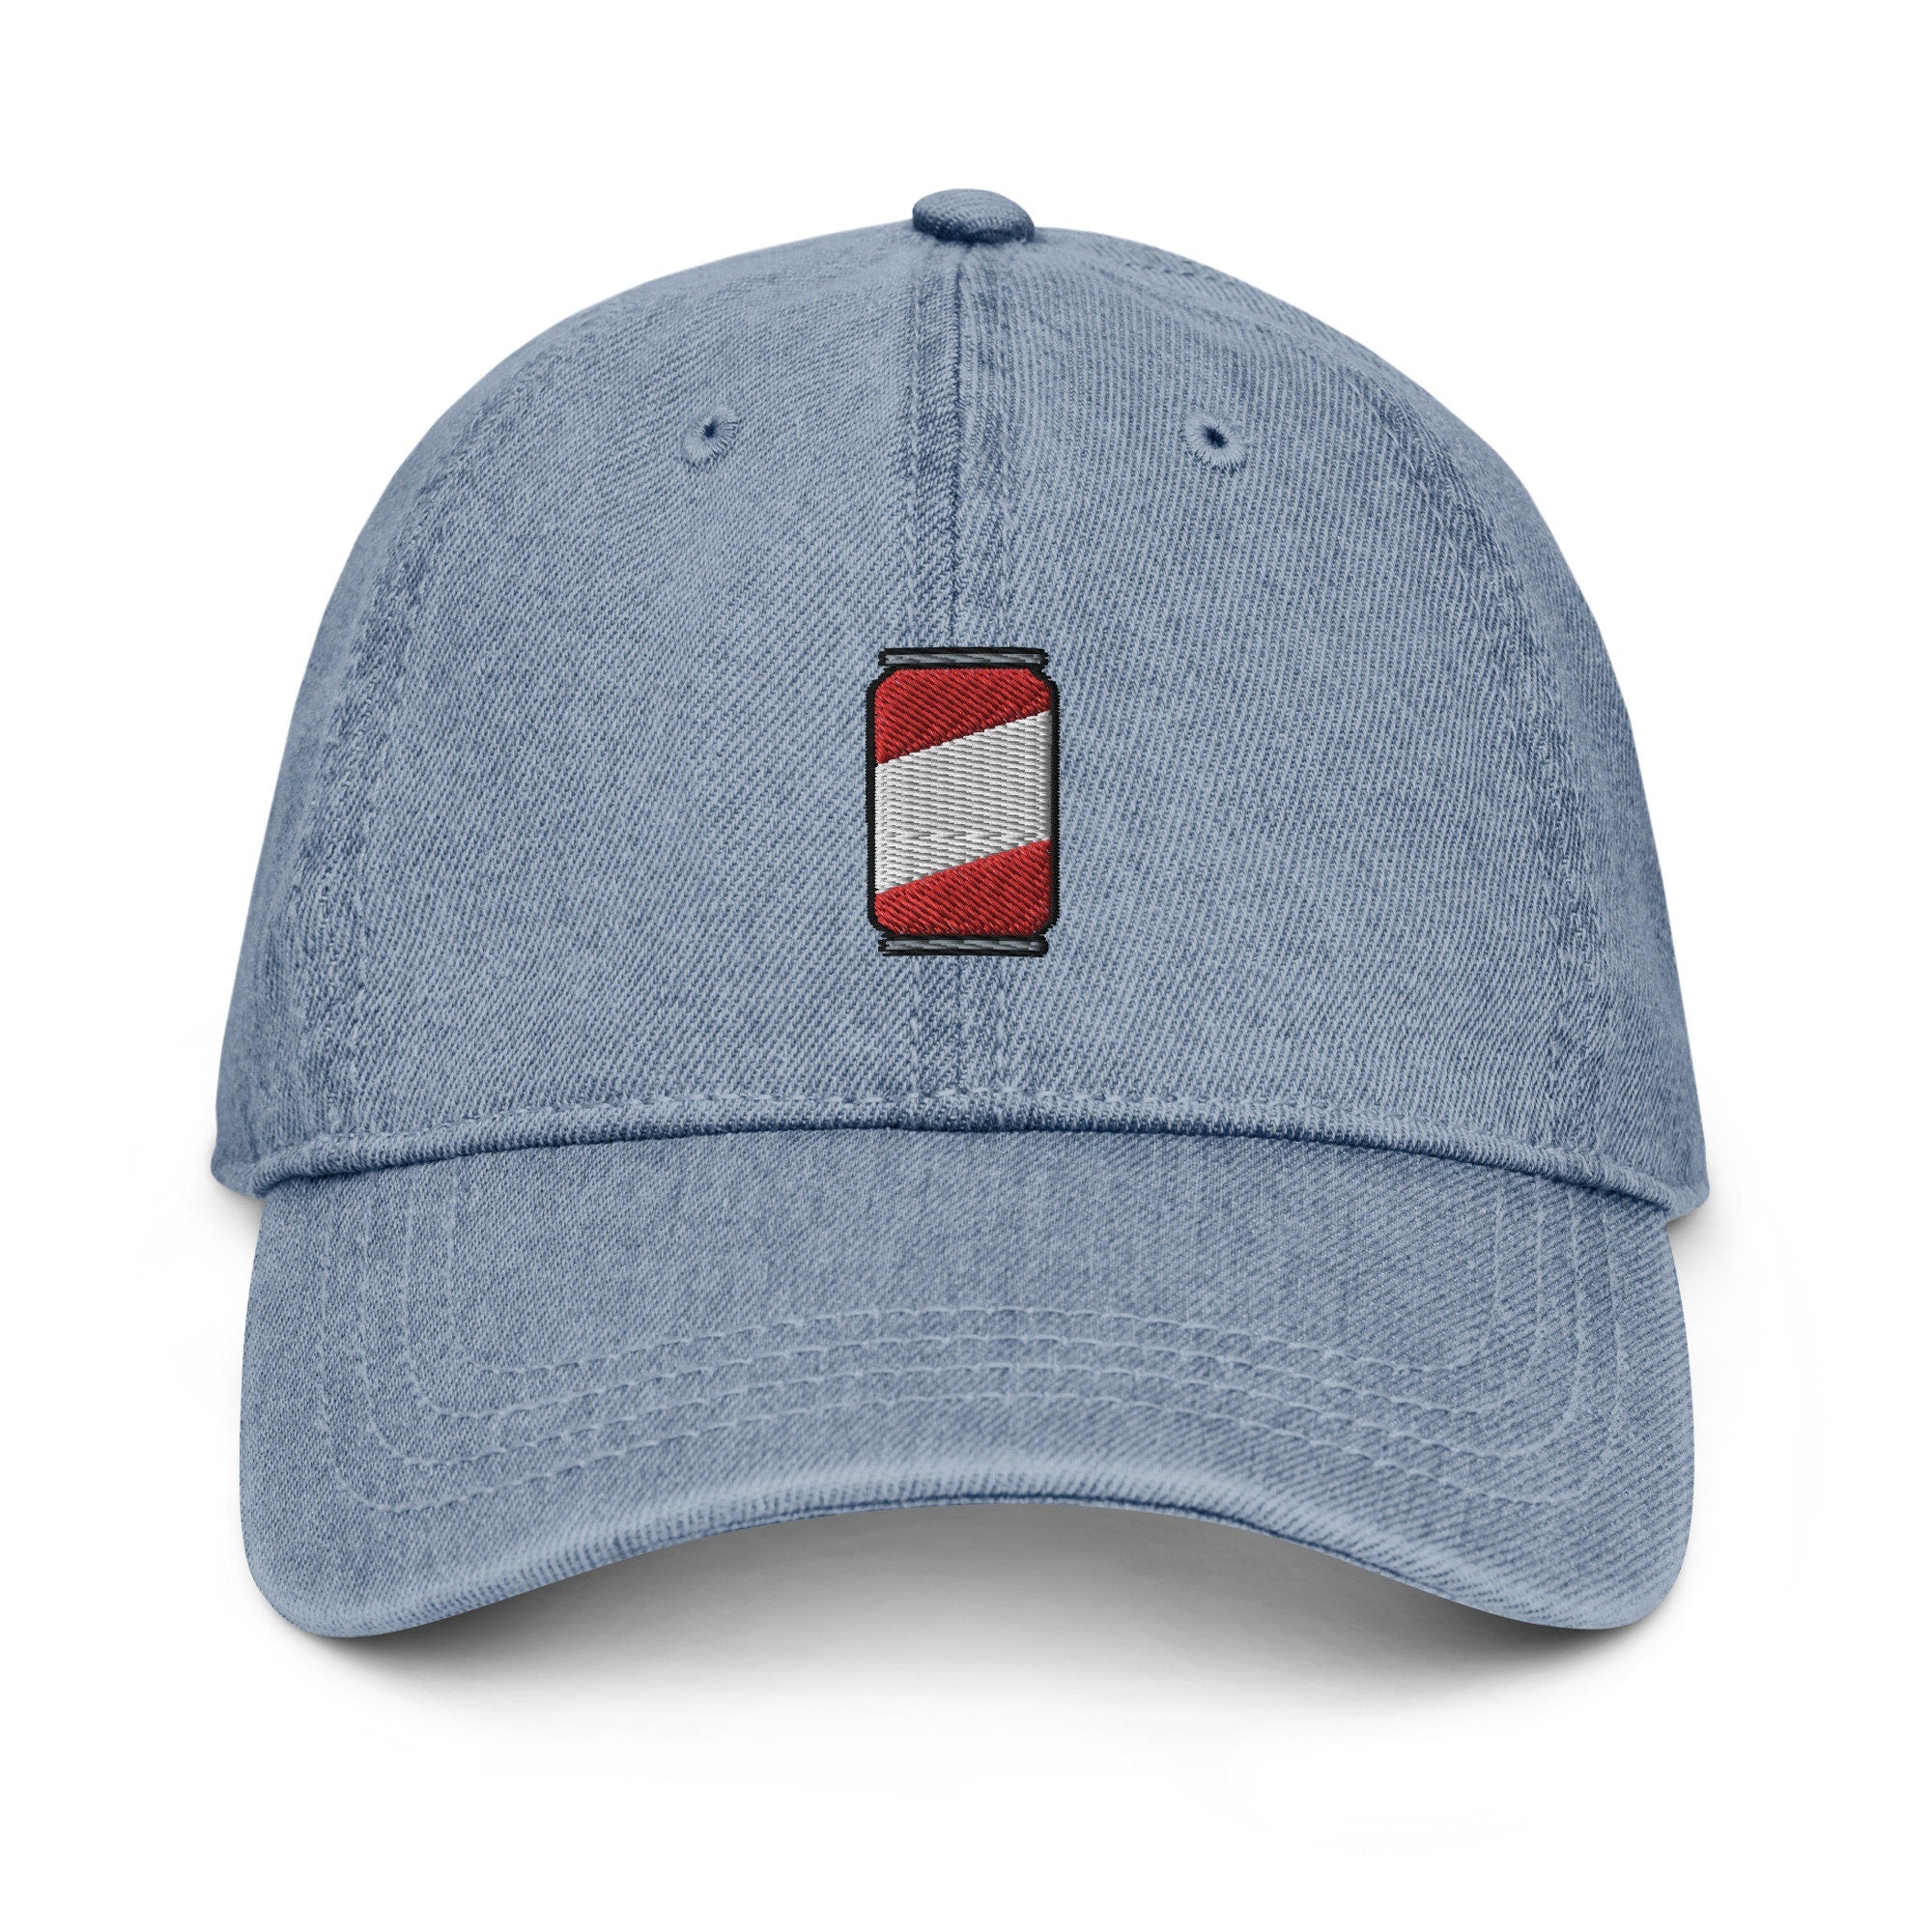 Soda Can Denim Hat, Premium Embroidered Denim Cap, Hat Embroidery Gift - Multiple Colors